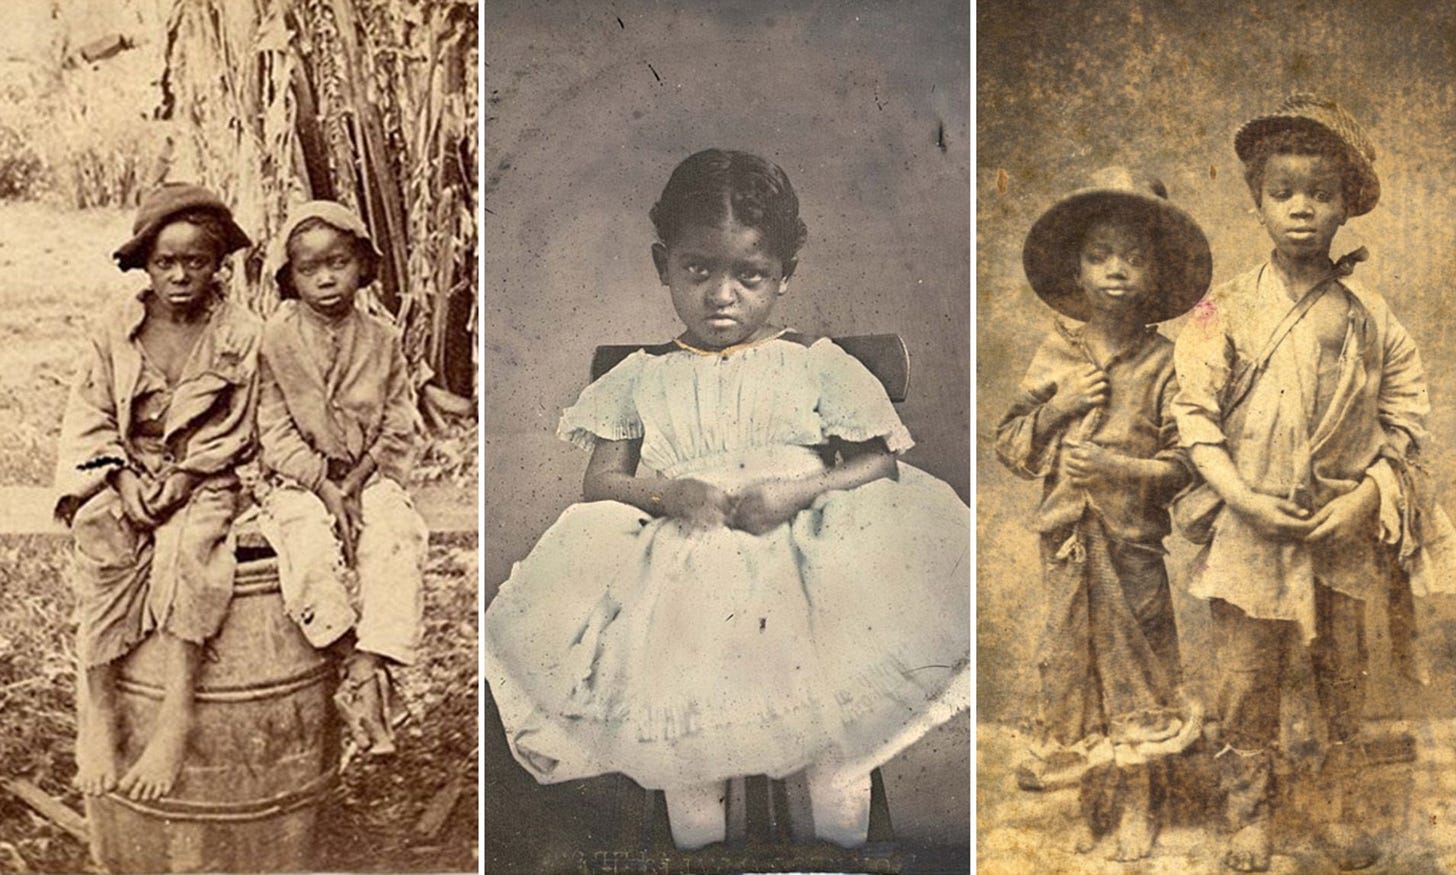 Photographs of enslaved children, none smiling - not their eyes nor their mouths.